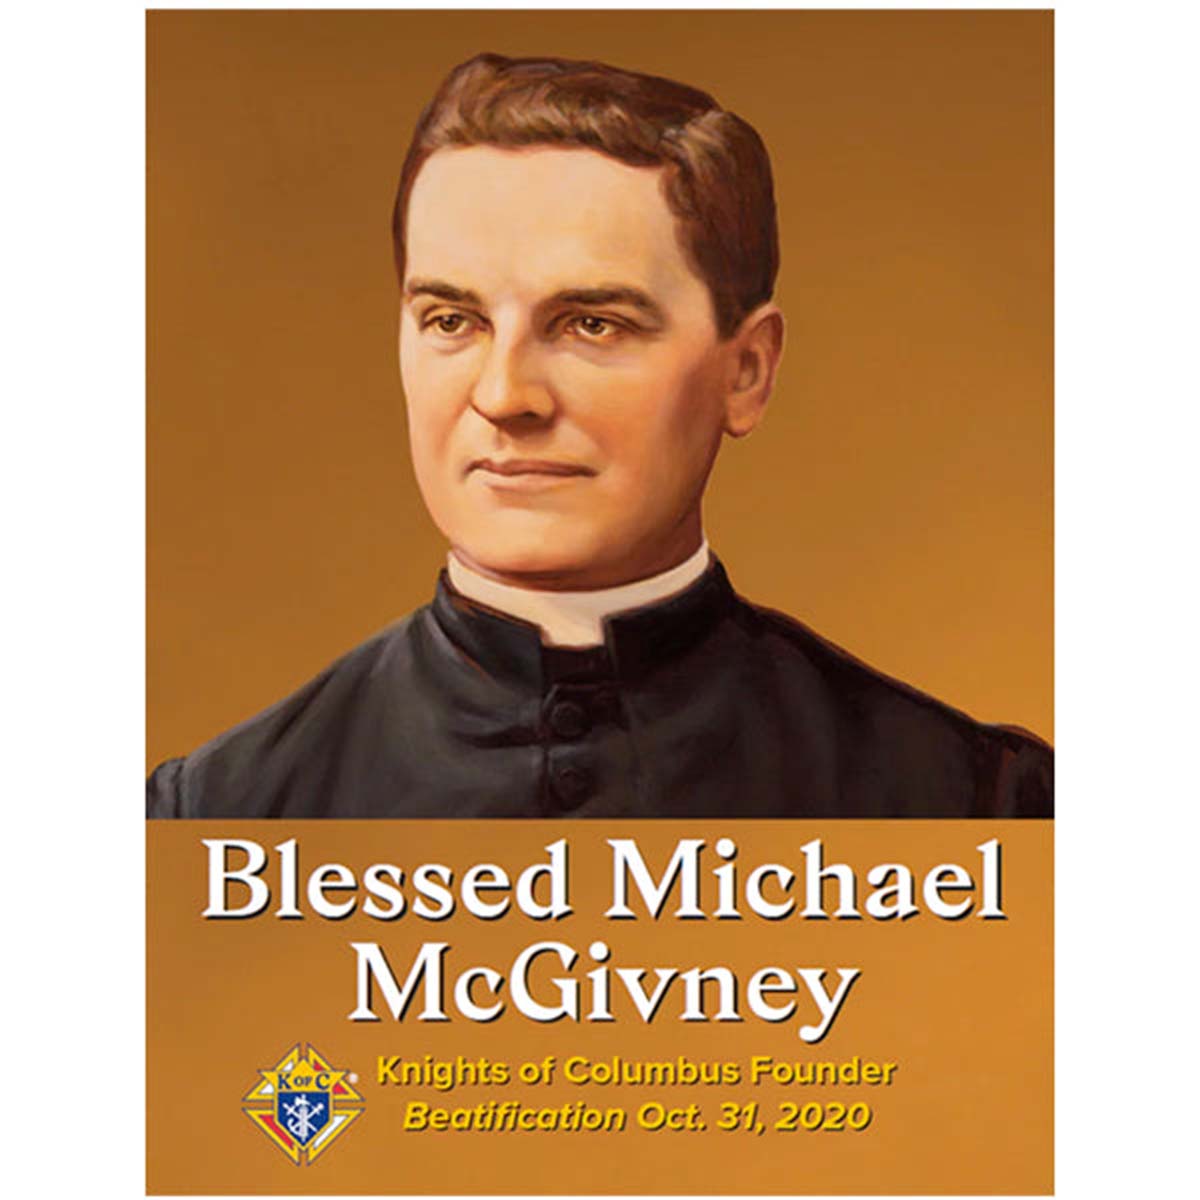 18 x 24 Blessed Michael McGivney Beatification Poster